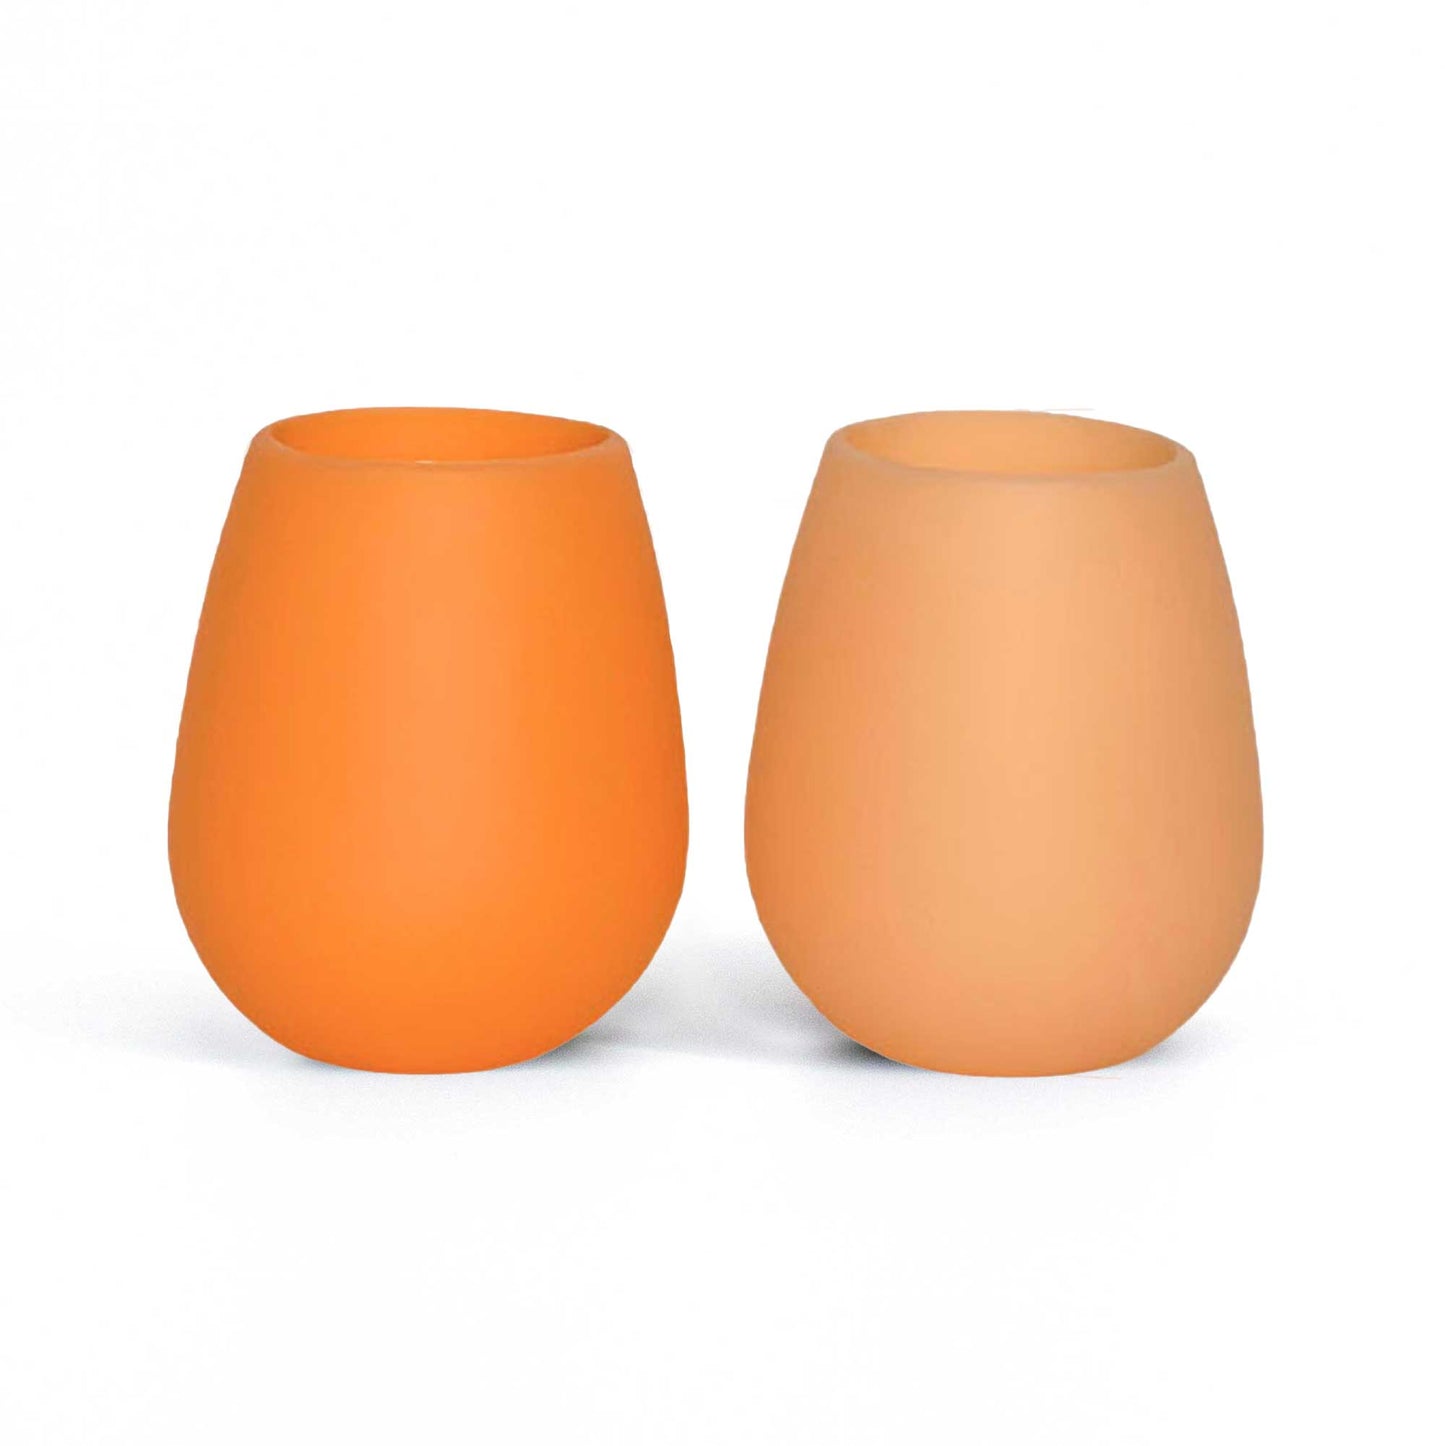 Set of two wine glasses made from food-grade silicone